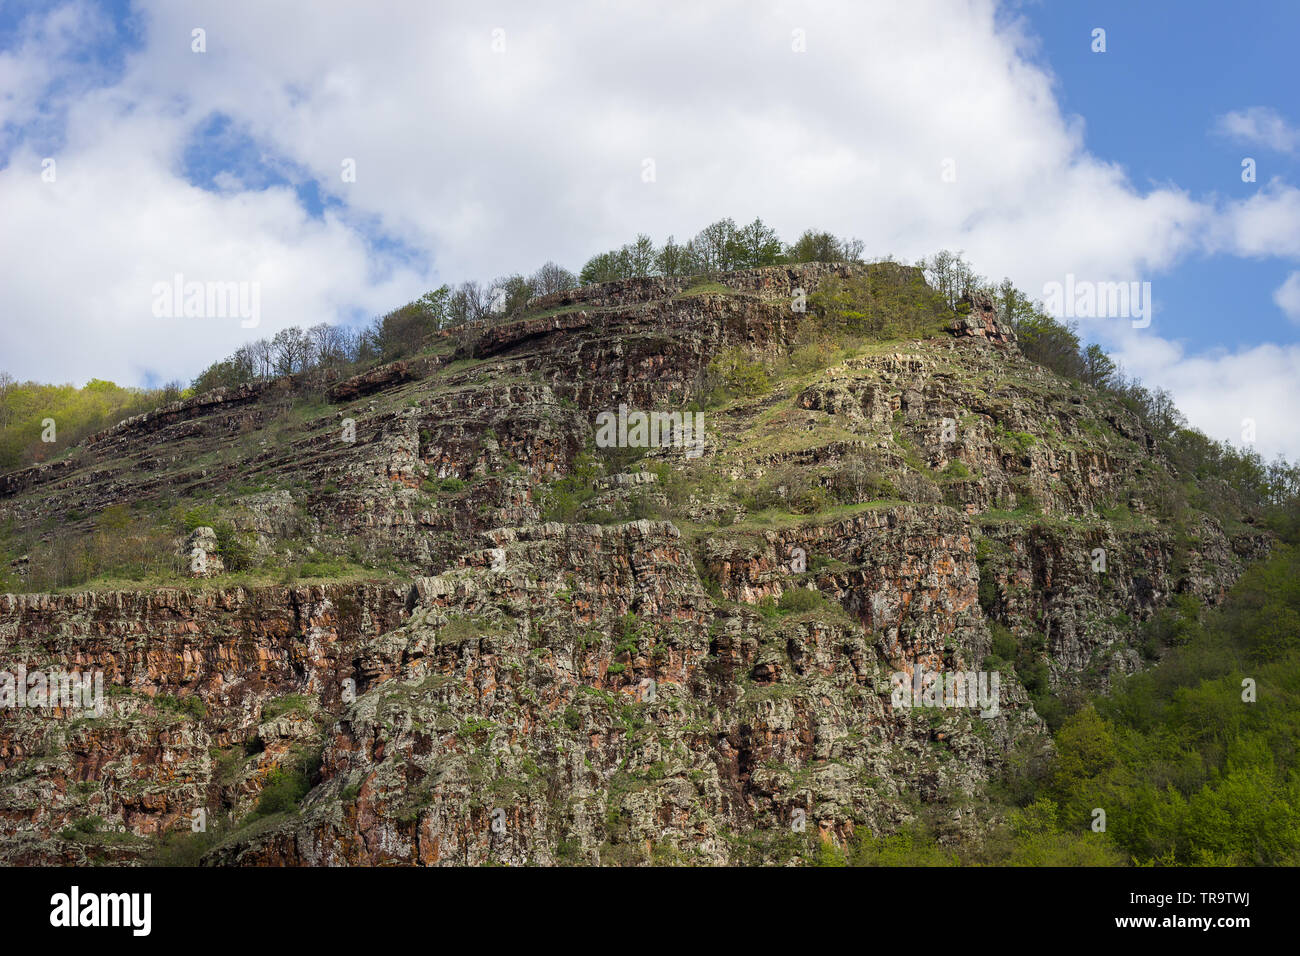 Impressive, red, rocky peak on Old mountain (Stara planina) in Serbia, covered by vivid green, sunlit trees and bushes during early spring Stock Photo